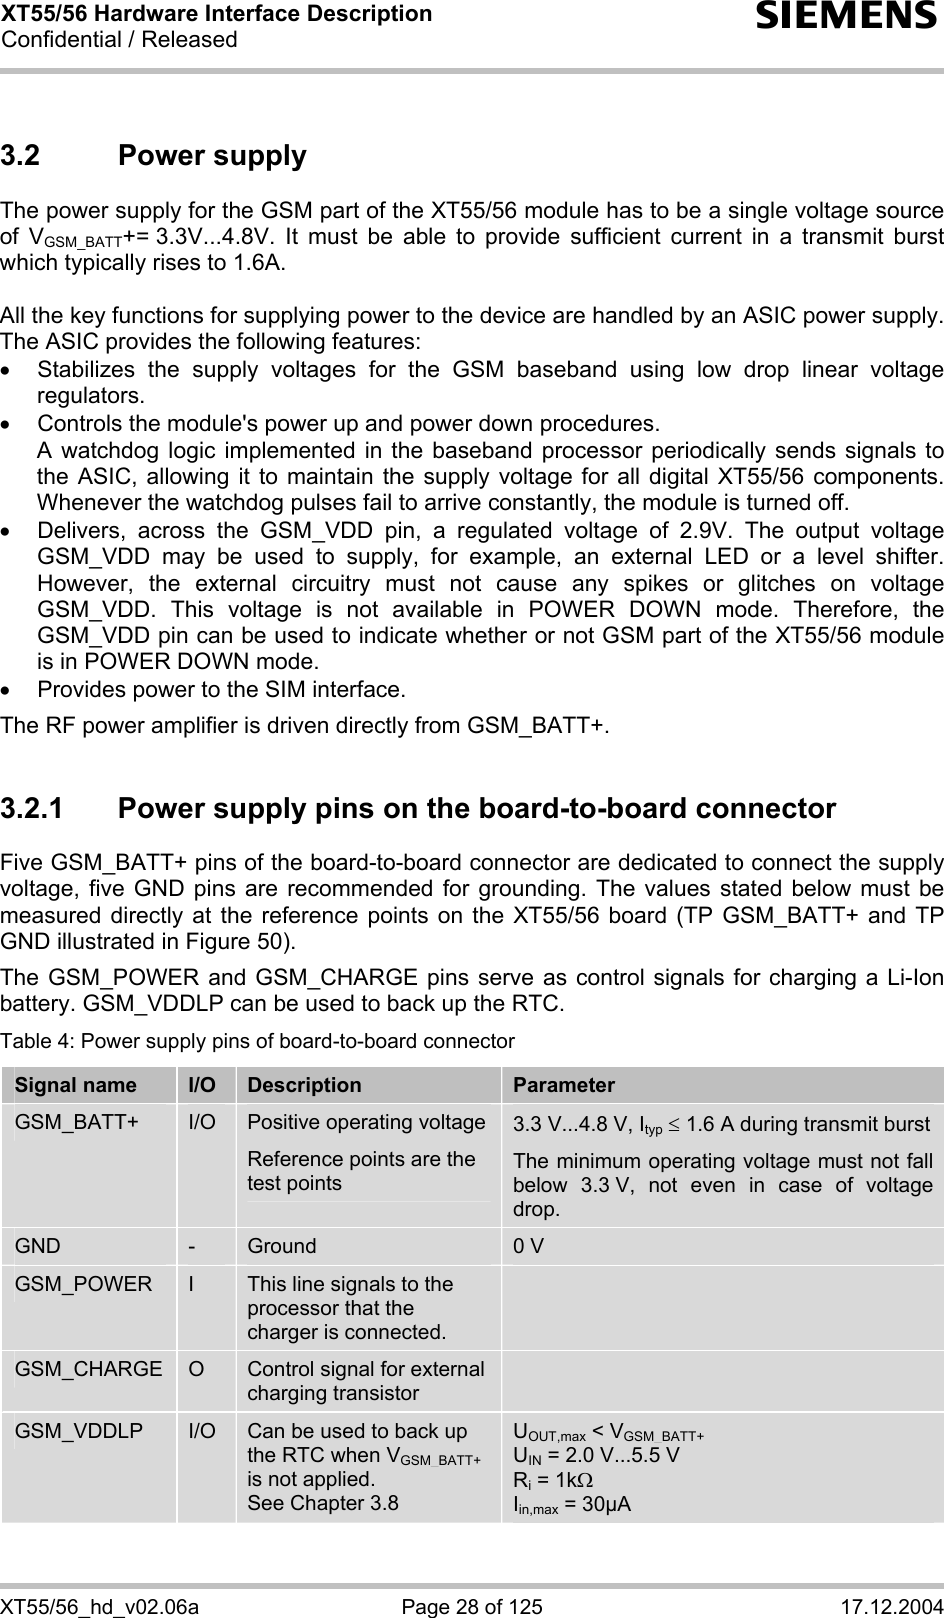 XT55/56 Hardware Interface Description Confidential / Released s XT55/56_hd_v02.06a  Page 28 of 125  17.12.2004 3.2 Power supply The power supply for the GSM part of the XT55/56 module has to be a single voltage source of VGSM_BATT+= 3.3V...4.8V. It must be able to provide sufficient current in a transmit burst which typically rises to 1.6A.   All the key functions for supplying power to the device are handled by an ASIC power supply. The ASIC provides the following features: • Stabilizes the supply voltages for the GSM baseband using low drop linear voltage regulators.  •  Controls the module&apos;s power up and power down procedures.  A watchdog logic implemented in the baseband processor periodically sends signals to the ASIC, allowing it to maintain the supply voltage for all digital XT55/56 components. Whenever the watchdog pulses fail to arrive constantly, the module is turned off.  •  Delivers, across the GSM_VDD pin, a regulated voltage of 2.9V. The output voltage GSM_VDD may be used to supply, for example, an external LED or a level shifter. However, the external circuitry must not cause any spikes or glitches on voltage GSM_VDD. This voltage is not available in POWER DOWN mode. Therefore, the GSM_VDD pin can be used to indicate whether or not GSM part of the XT55/56 module is in POWER DOWN mode. •  Provides power to the SIM interface.  The RF power amplifier is driven directly from GSM_BATT+.  3.2.1  Power supply pins on the board-to-board connector Five GSM_BATT+ pins of the board-to-board connector are dedicated to connect the supply voltage, five GND pins are recommended for grounding. The values stated below must be measured directly at the reference points on the XT55/56 board (TP GSM_BATT+ and TP GND illustrated in Figure 50).  The GSM_POWER and GSM_CHARGE pins serve as control signals for charging a Li-Ion battery. GSM_VDDLP can be used to back up the RTC.  Table 4: Power supply pins of board-to-board connector Signal name  I/O  Description  Parameter GSM_BATT+  I/O  Positive operating voltage Reference points are the test points  3.3 V...4.8 V, Ityp ≤ 1.6 A during transmit burst The minimum operating voltage must not fall below 3.3 V, not even in case of voltage drop. GND  -  Ground  0 V GSM_POWER  I  This line signals to the processor that the charger is connected.  GSM_CHARGE  O  Control signal for external charging transistor  GSM_VDDLP  I/O  Can be used to back up the RTC when VGSM_BATT+ is not applied.  See Chapter 3.8 UOUT,max &lt; VGSM_BATT+ UIN = 2.0 V...5.5 V Ri = 1kΩ Iin,max = 30µA  